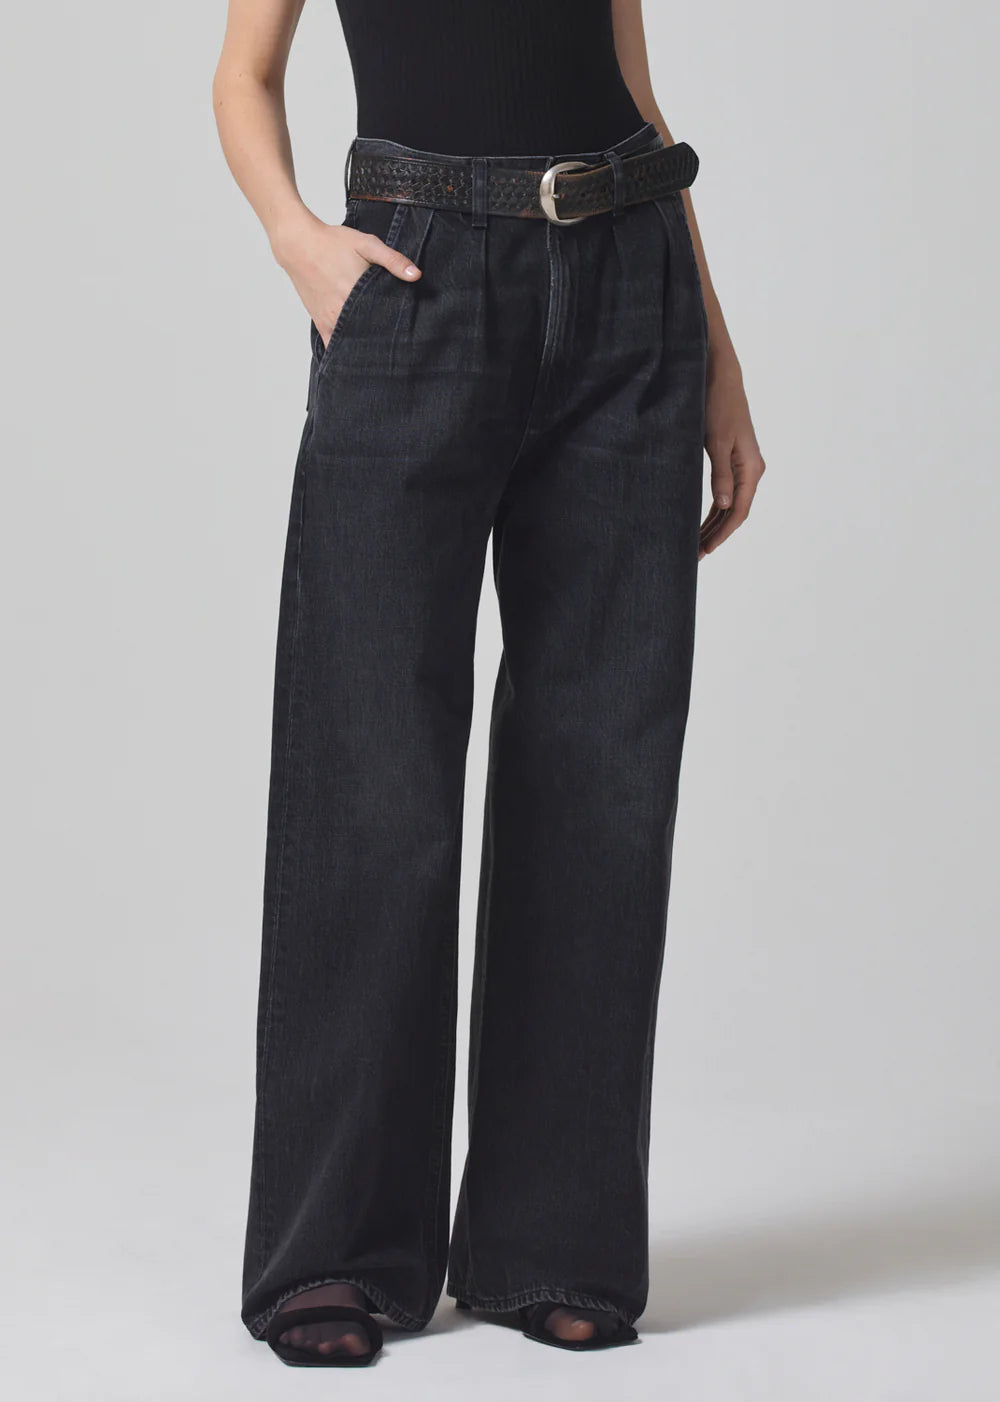 Citizens of Humanity :: Maritzy Pleated Trouser